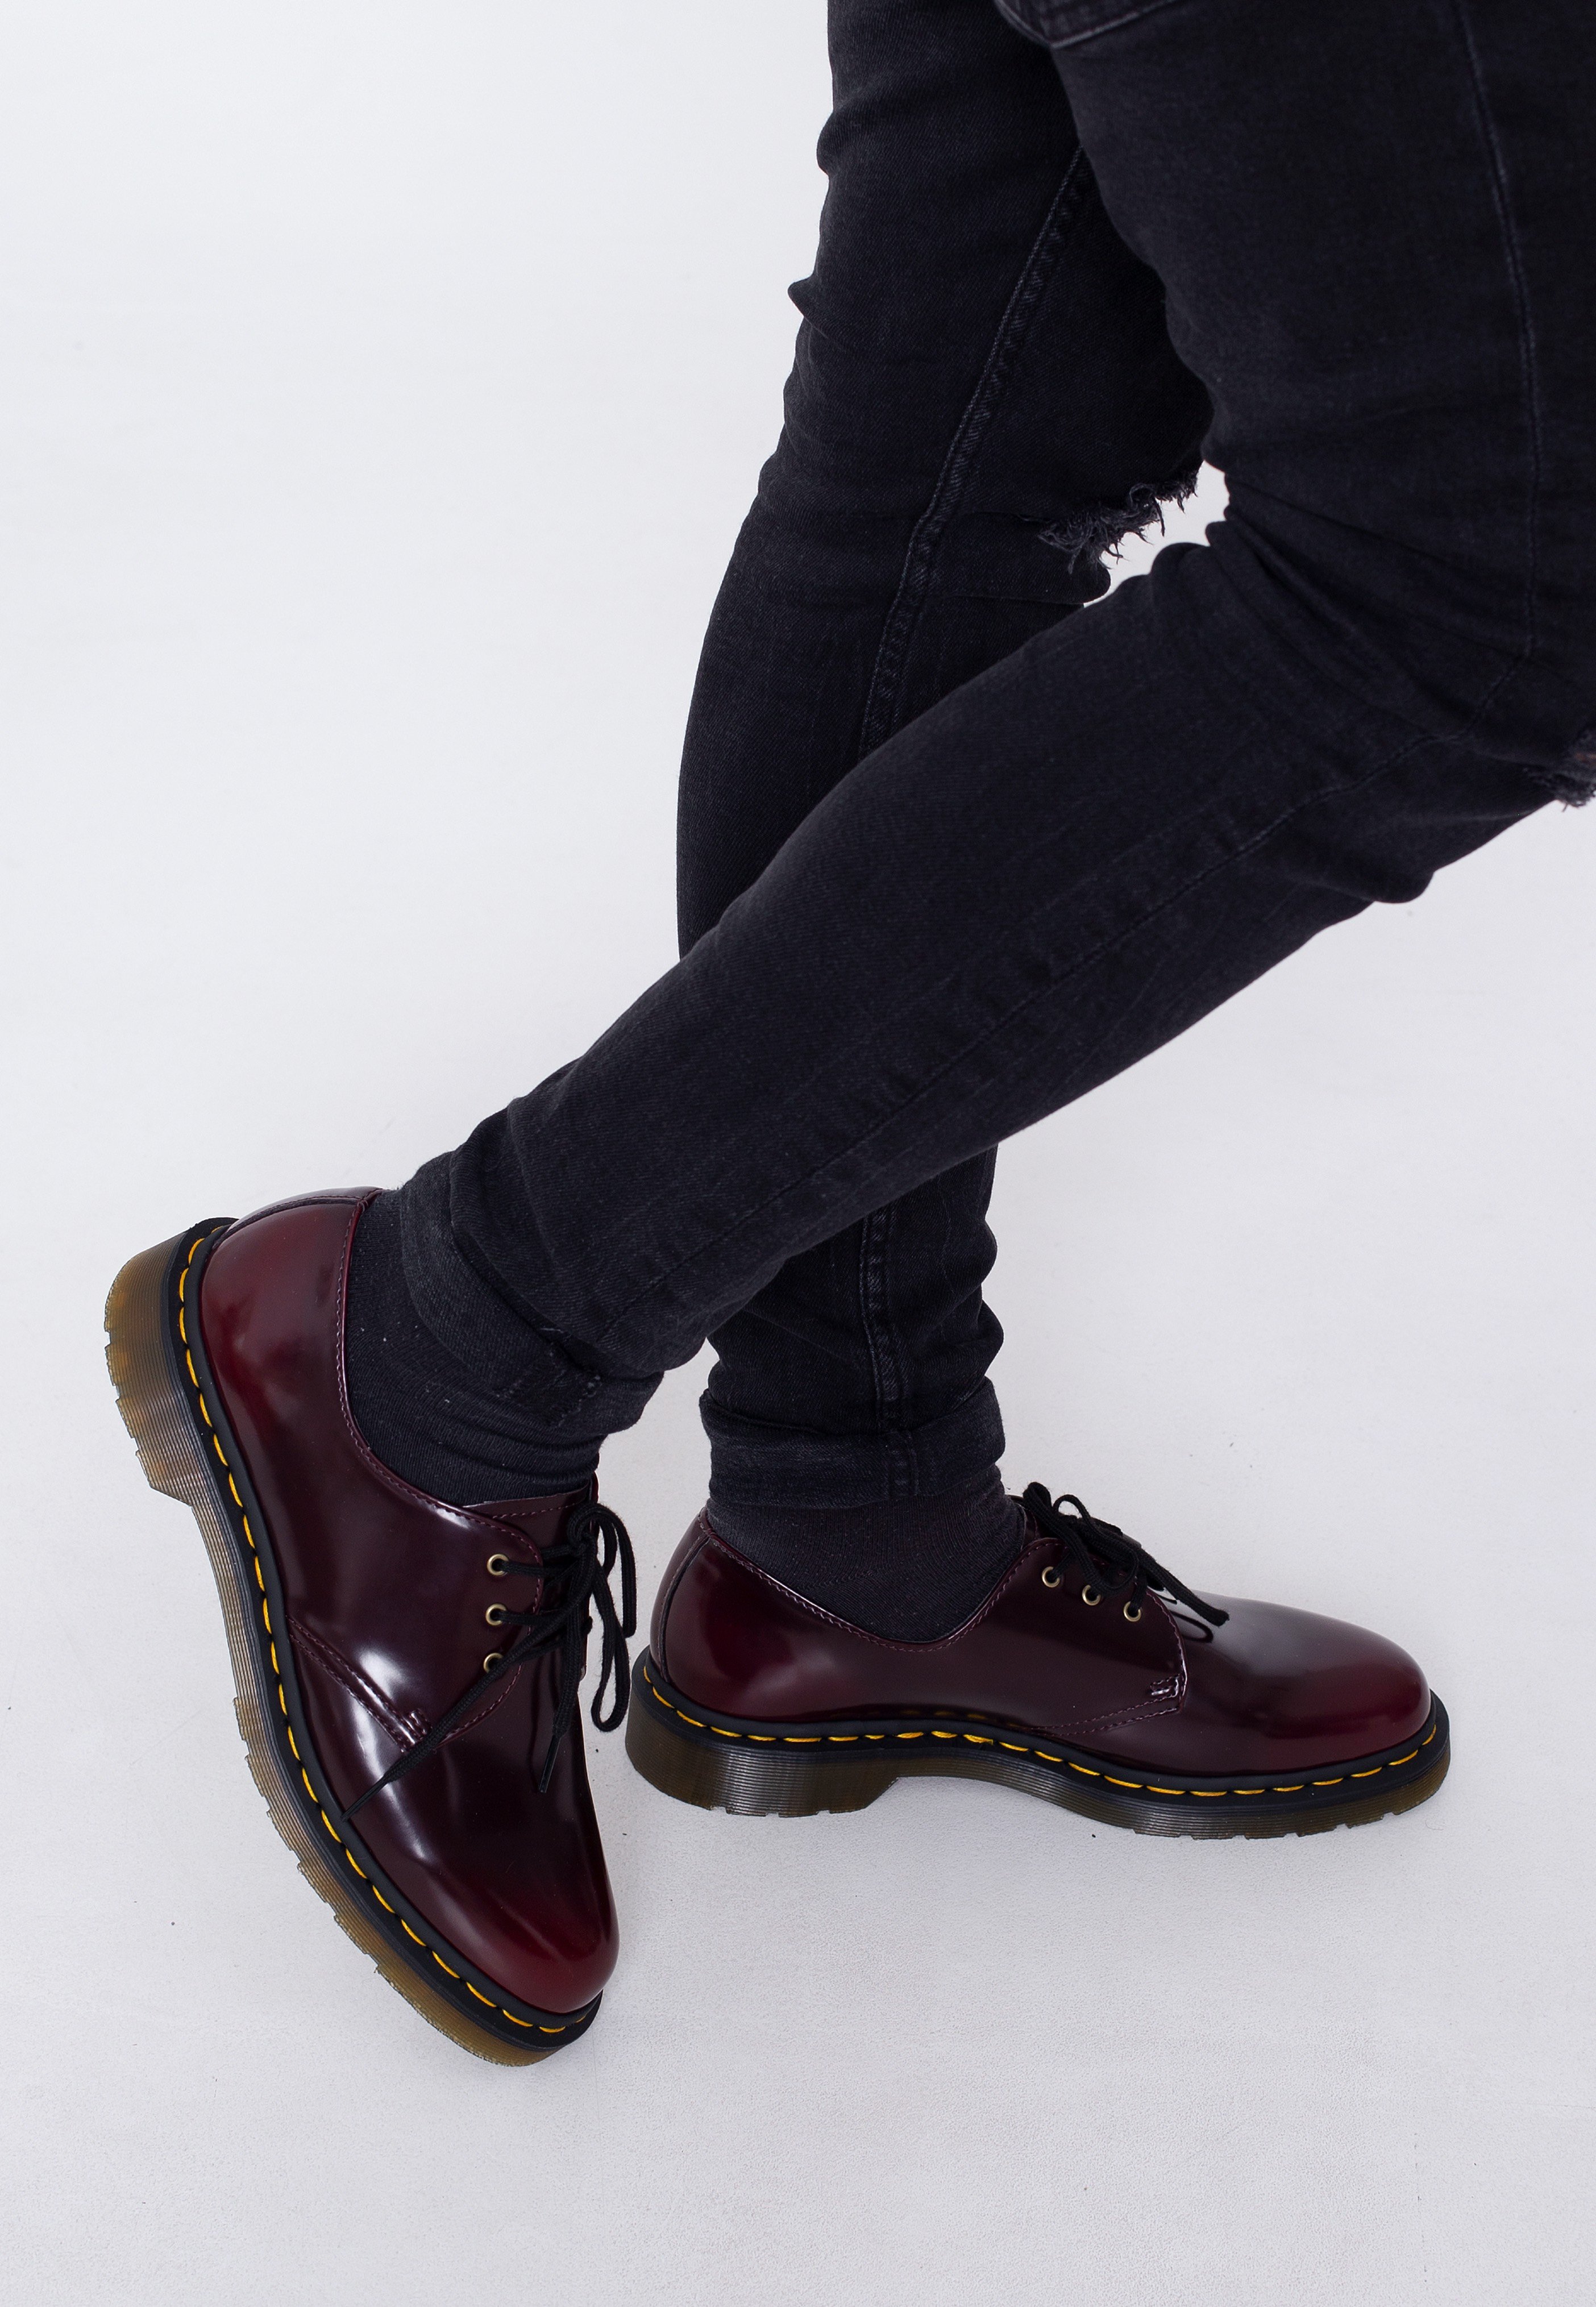 Dr. Martens - Vegan 1461 Cherry Red Oxford Rub Off - Shoes 